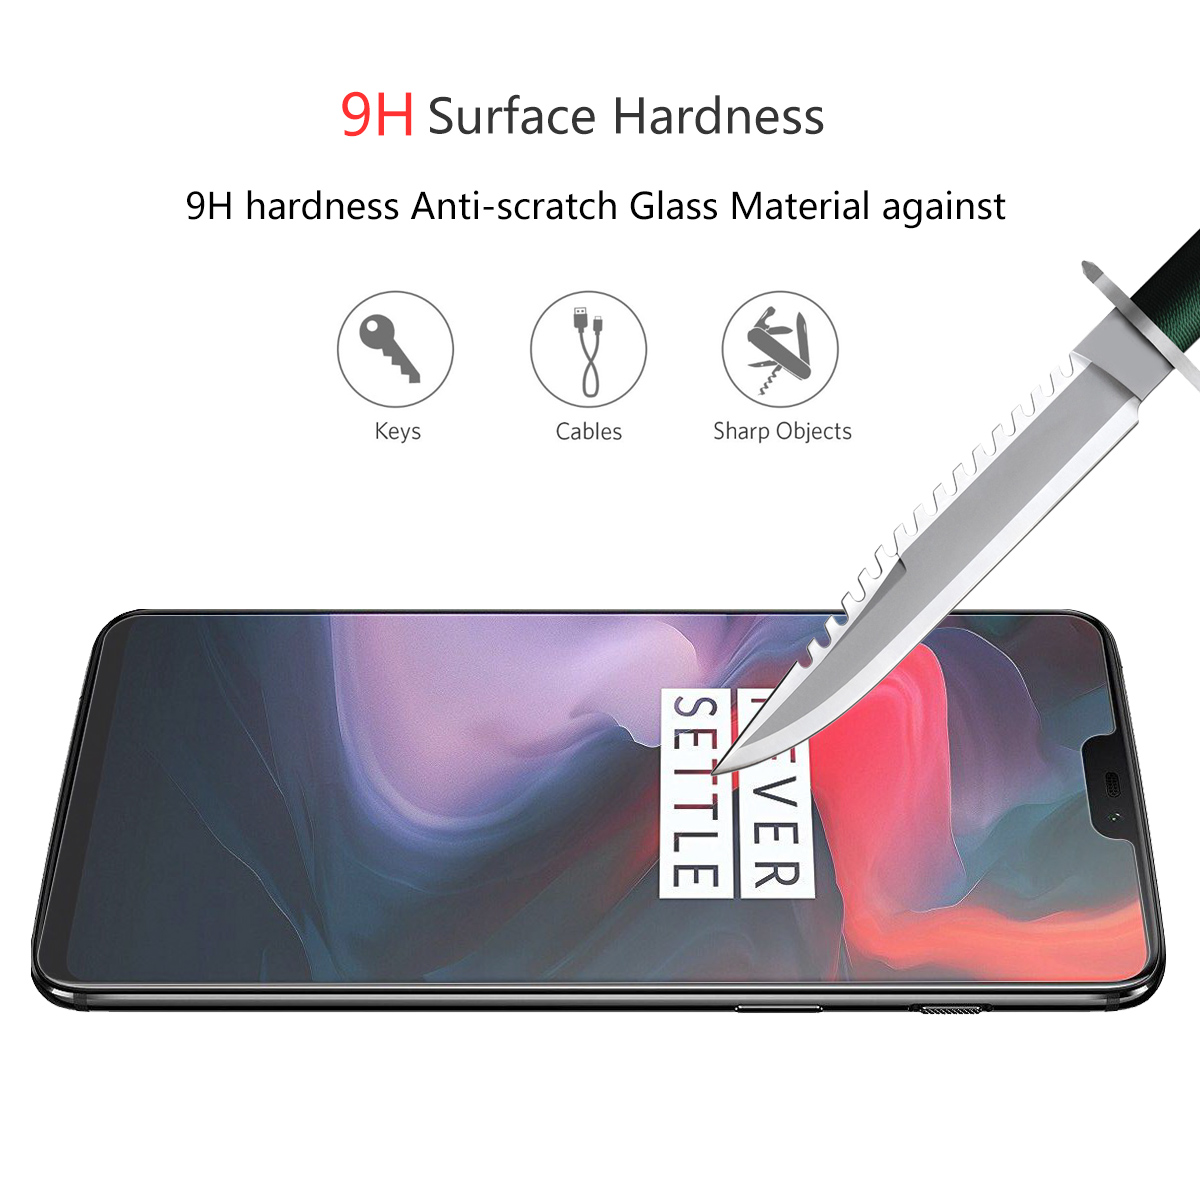 2-Packs-Enkay-Screen-Protector-For-Samsung-Galaxy-A7-2018-25D-Curved-Edge-Tempered-Glass-Film-1368900-2